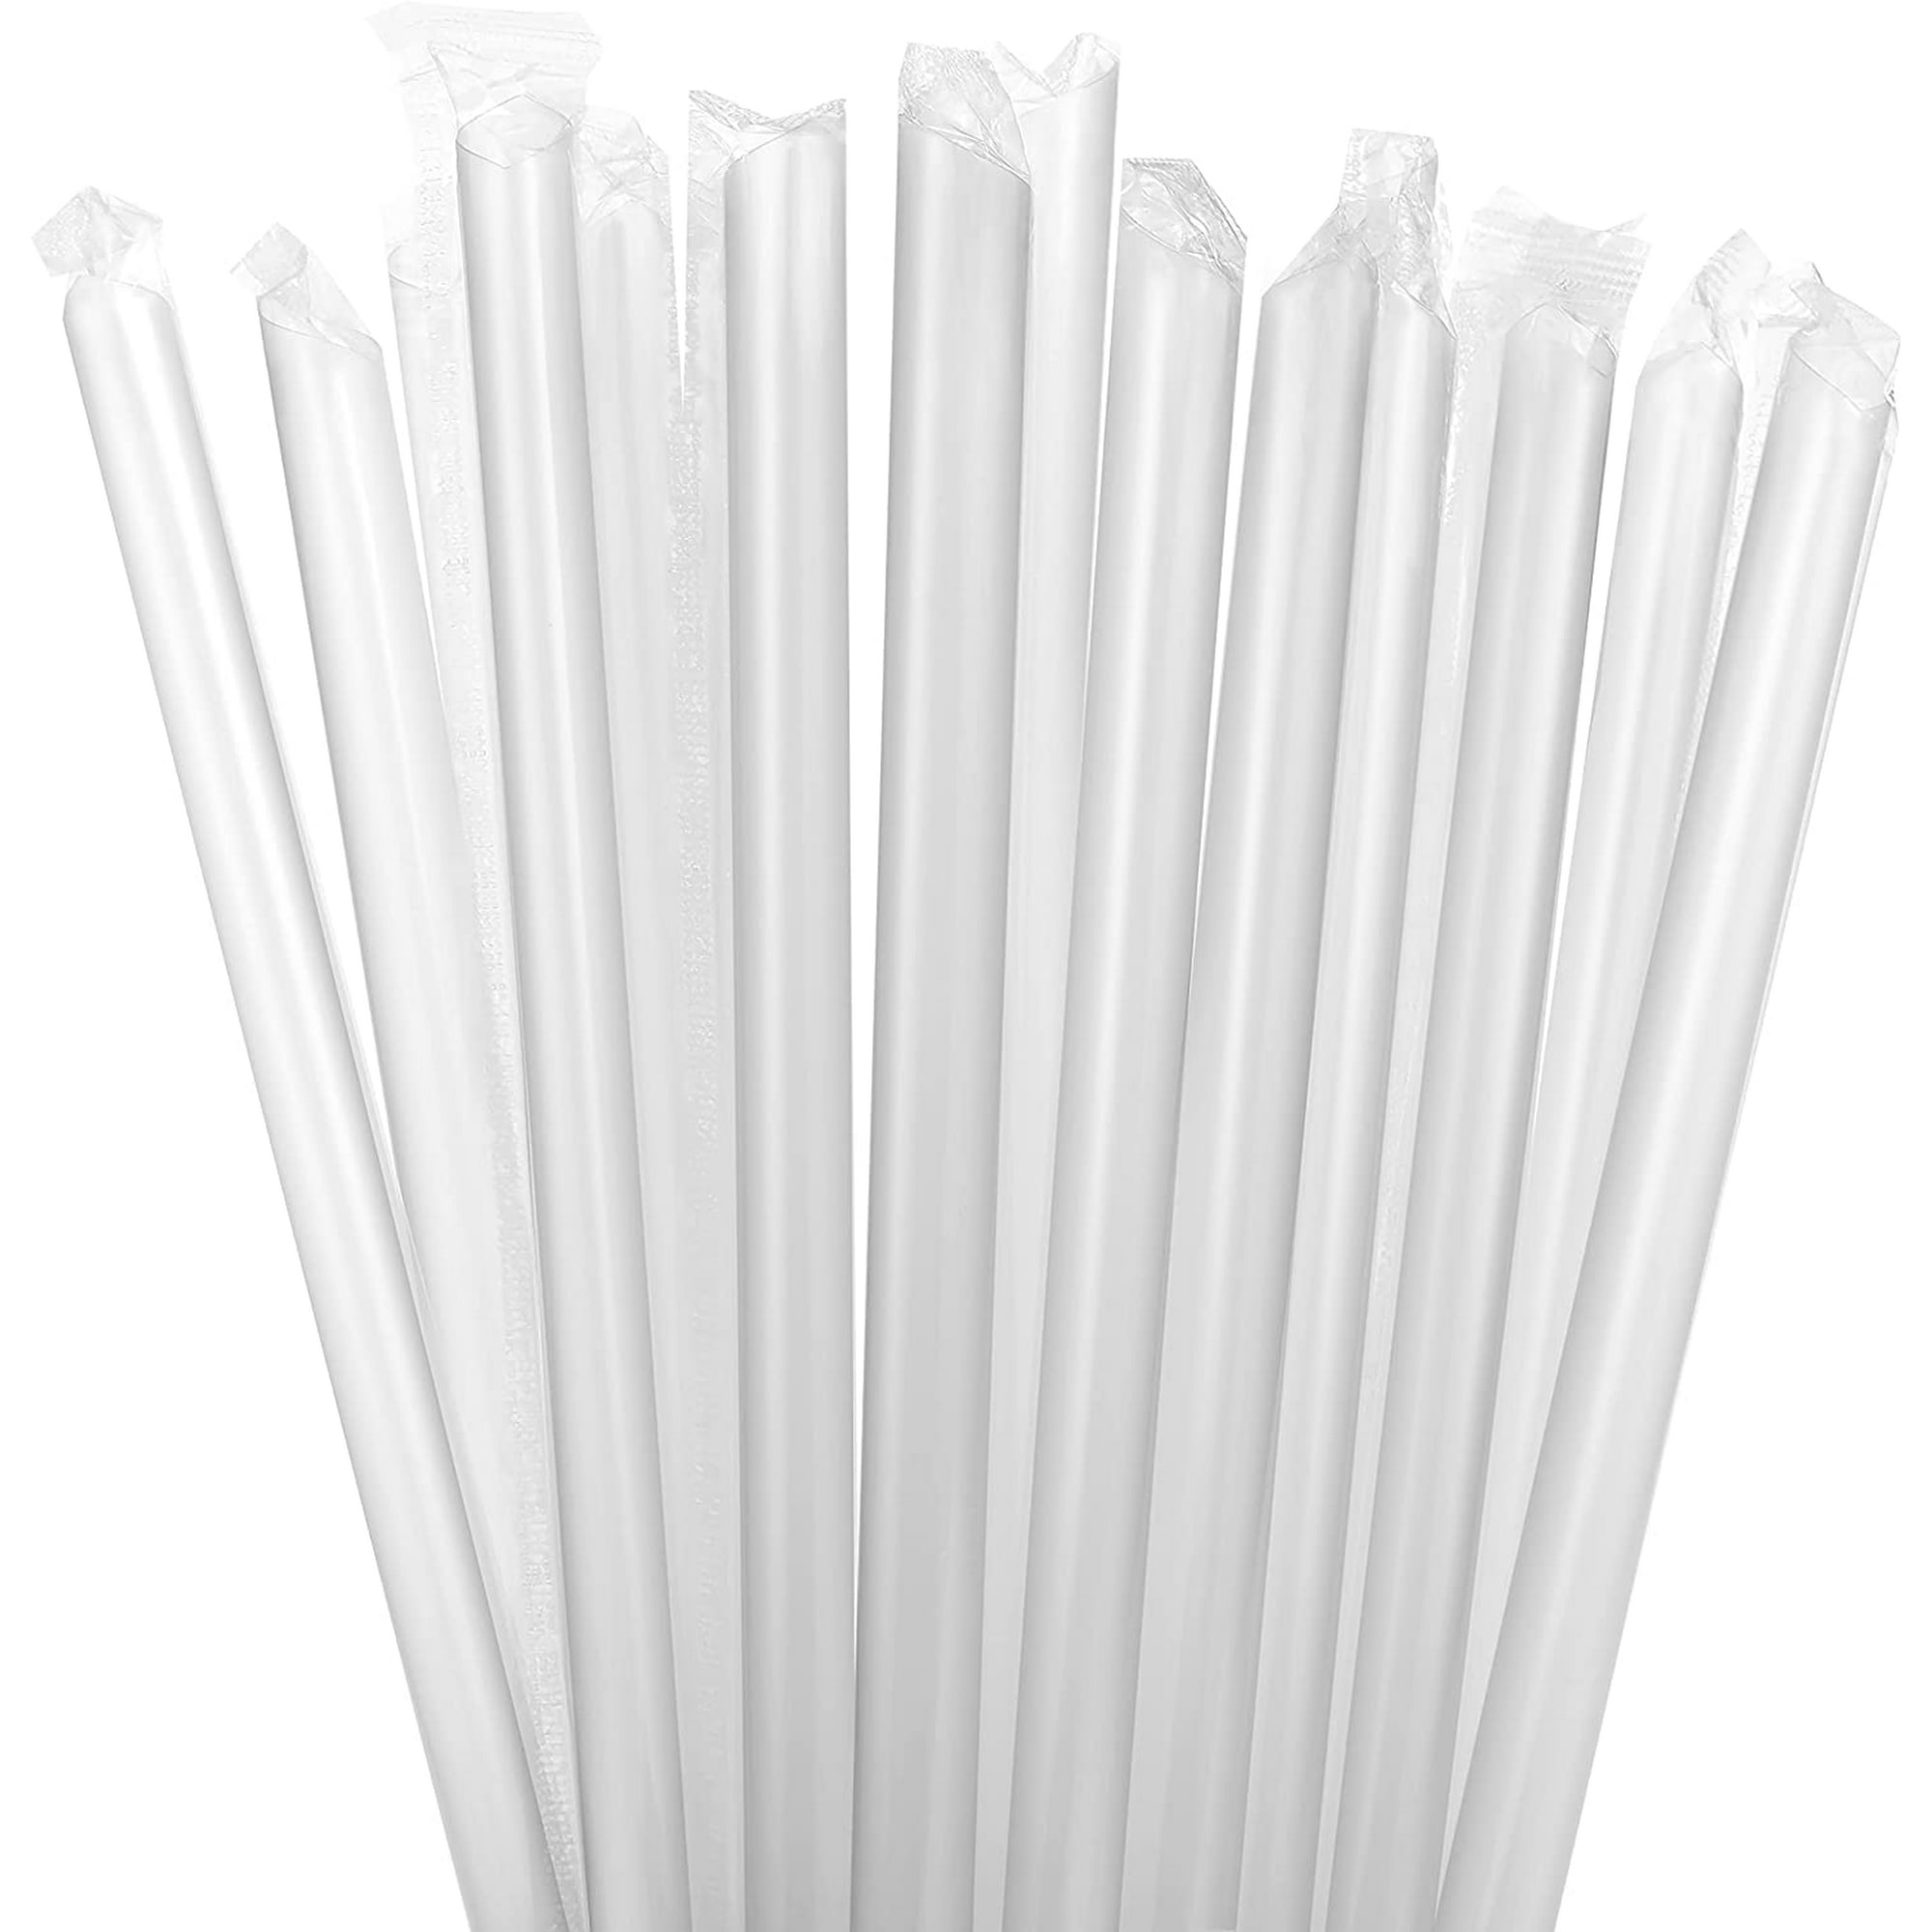 100 Pcs Plastic Boba Straws, 0.43 inch Wide x 9.45 inch Long Disposable Smoothie Straws for Bubble Tea, Milkshakes, Popping Pearls,Black